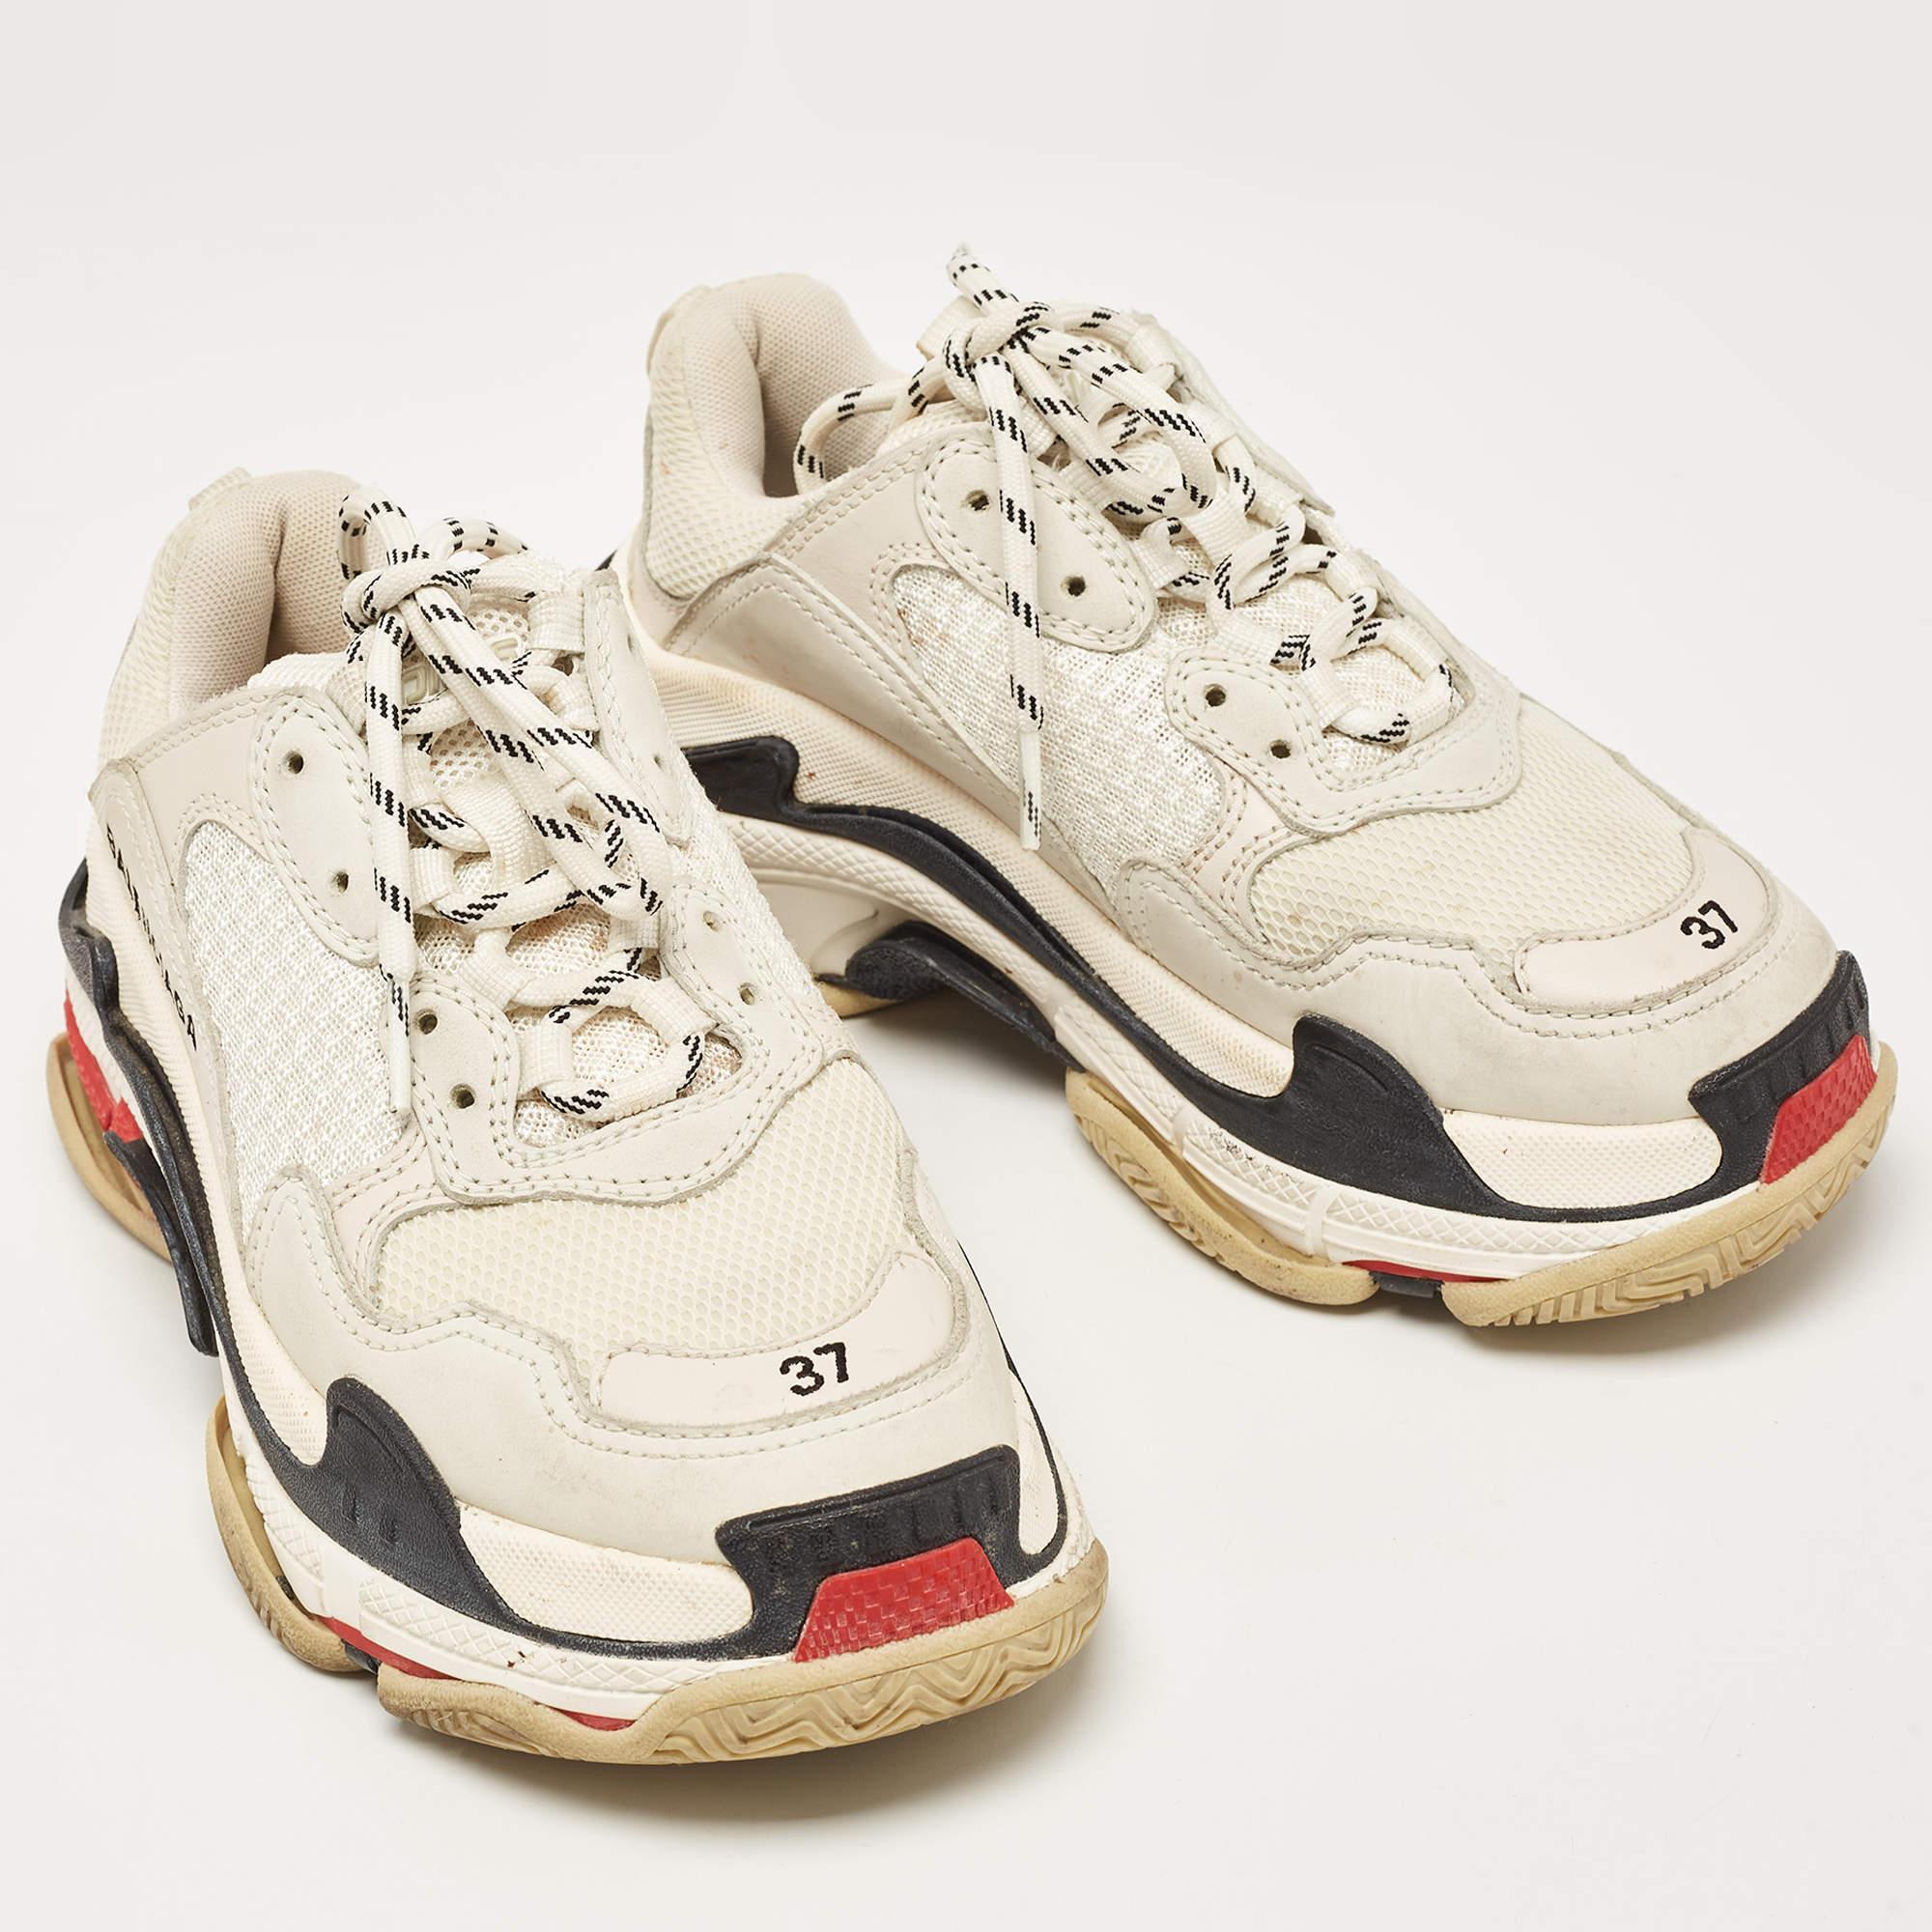 Balenciaga Multicolor Mesh and Nubuck Leather Triple S Low Top Sneakers Size 37 For Sale 1